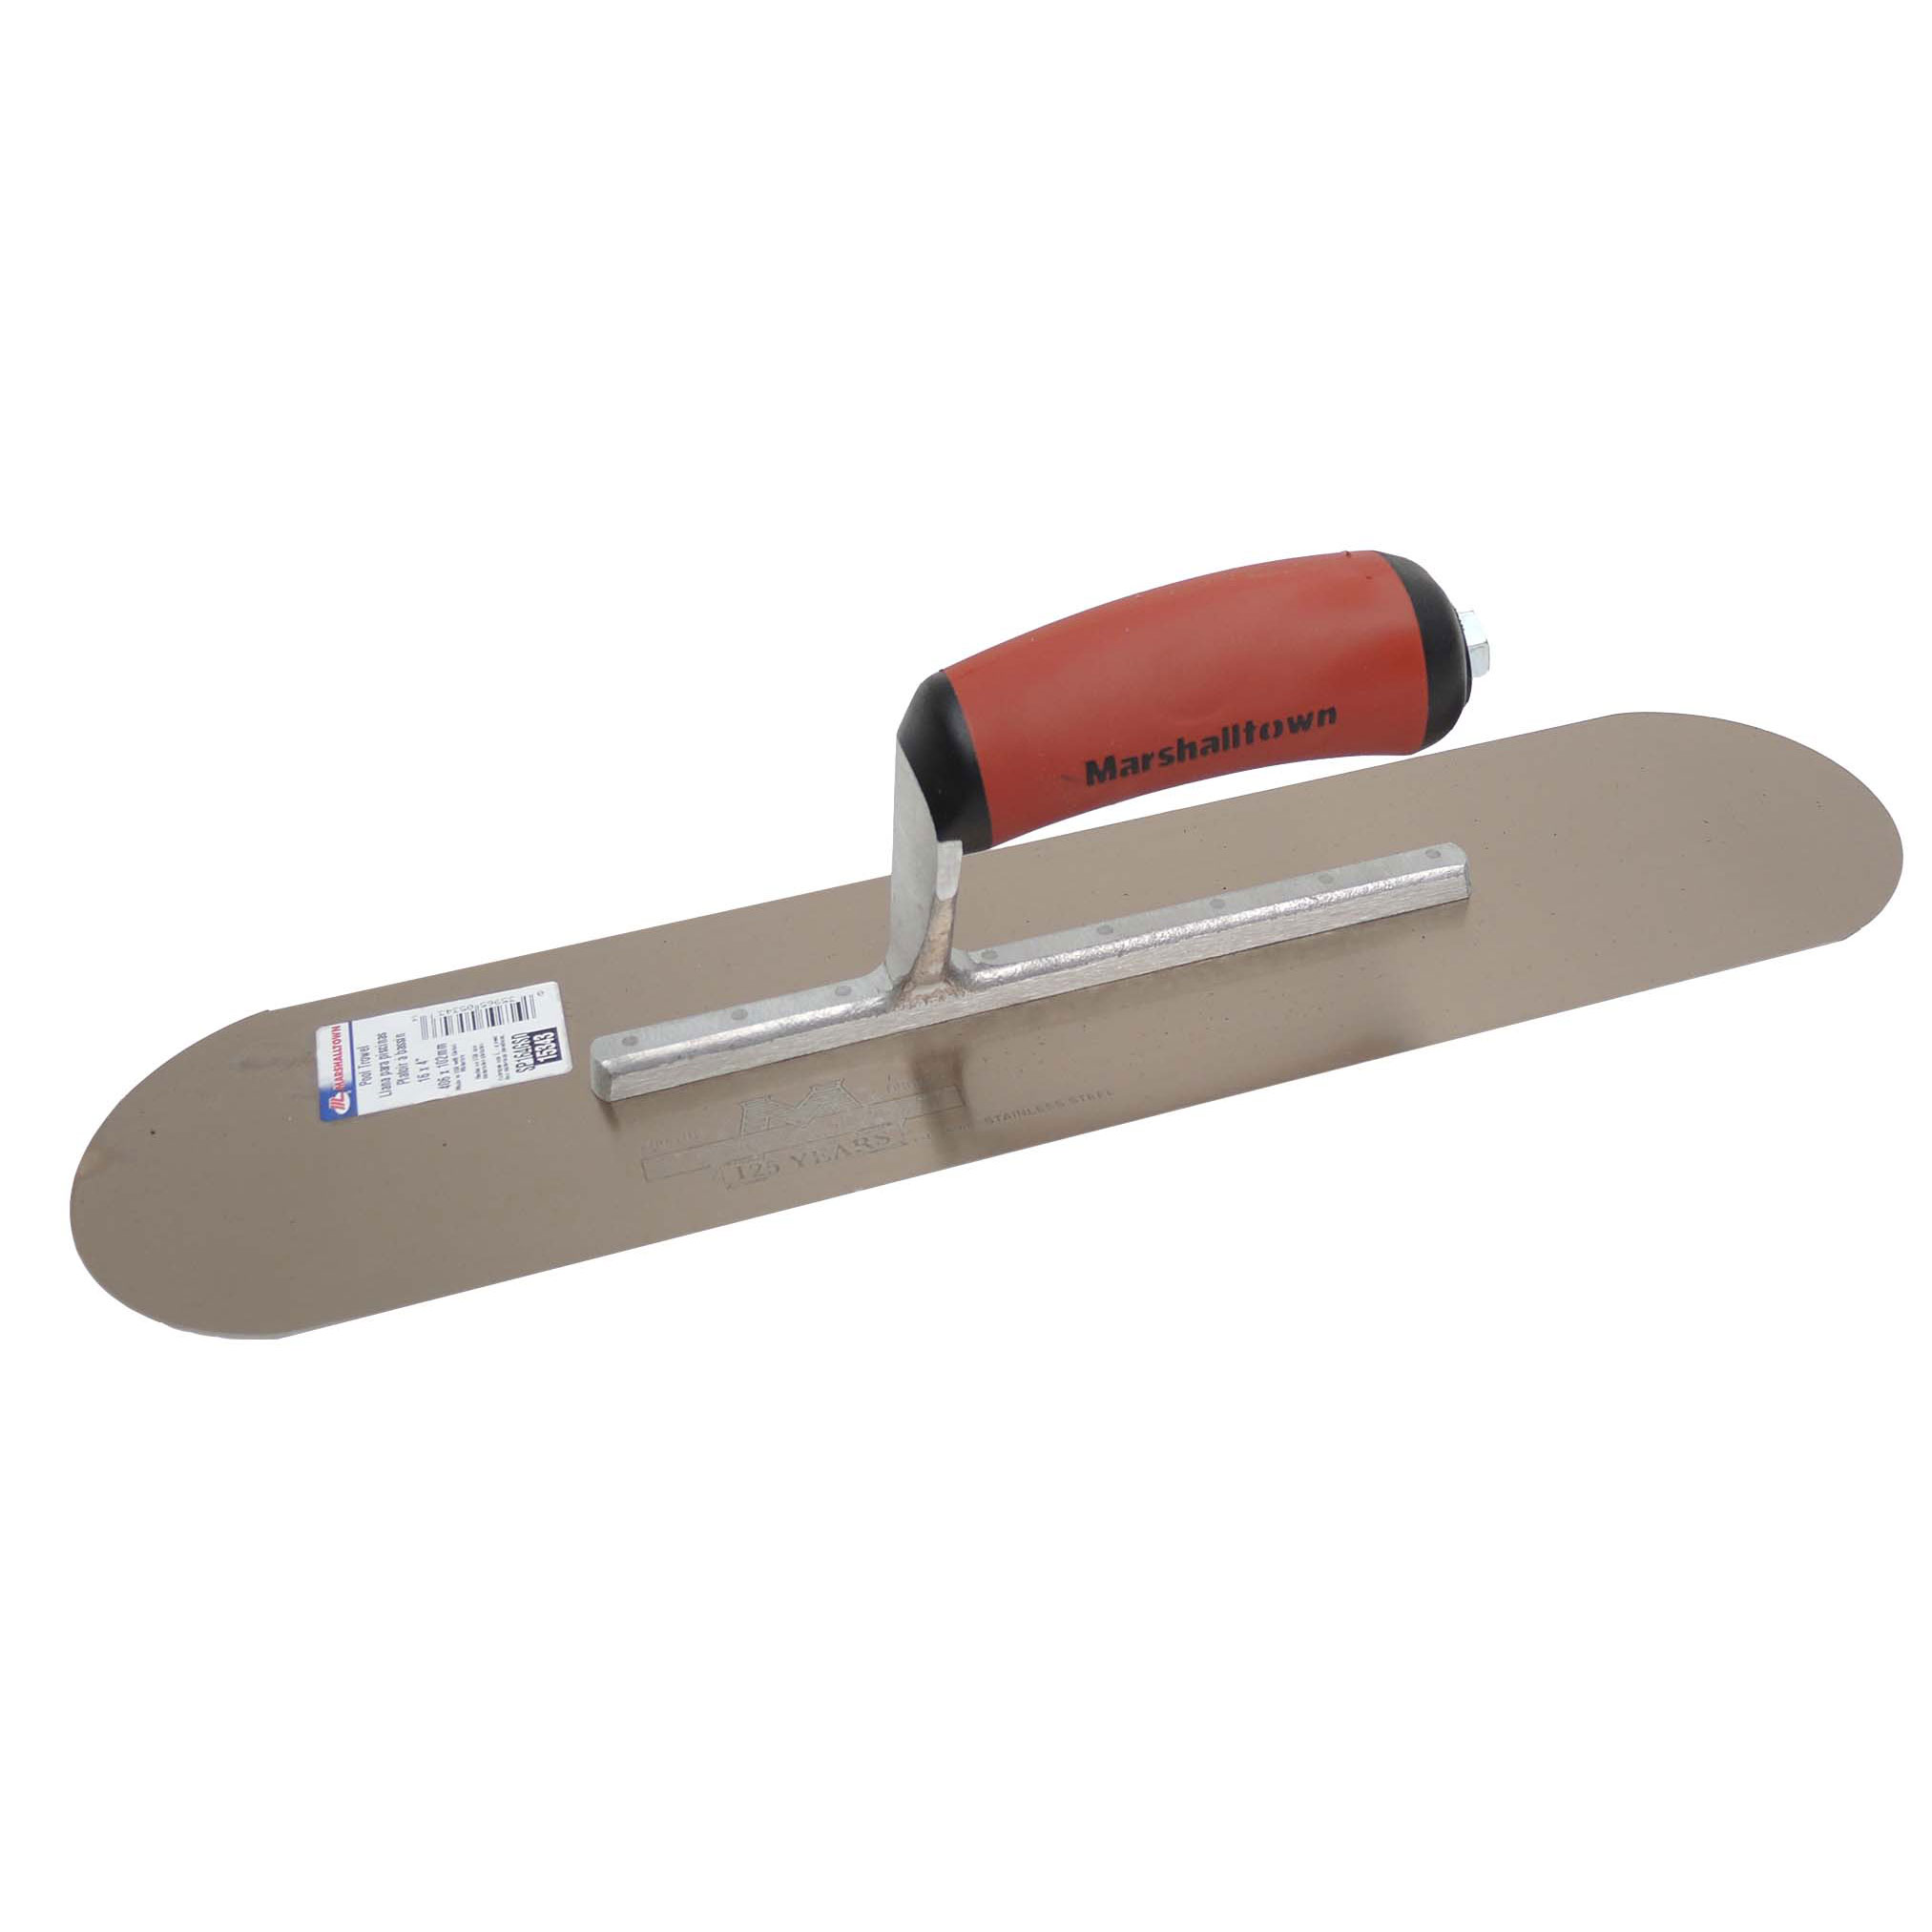 Marshalltown SP164GSD 16in x 4in Golden Stainless Steel Pool Trowel with DuraSoft Handle SP164GSD